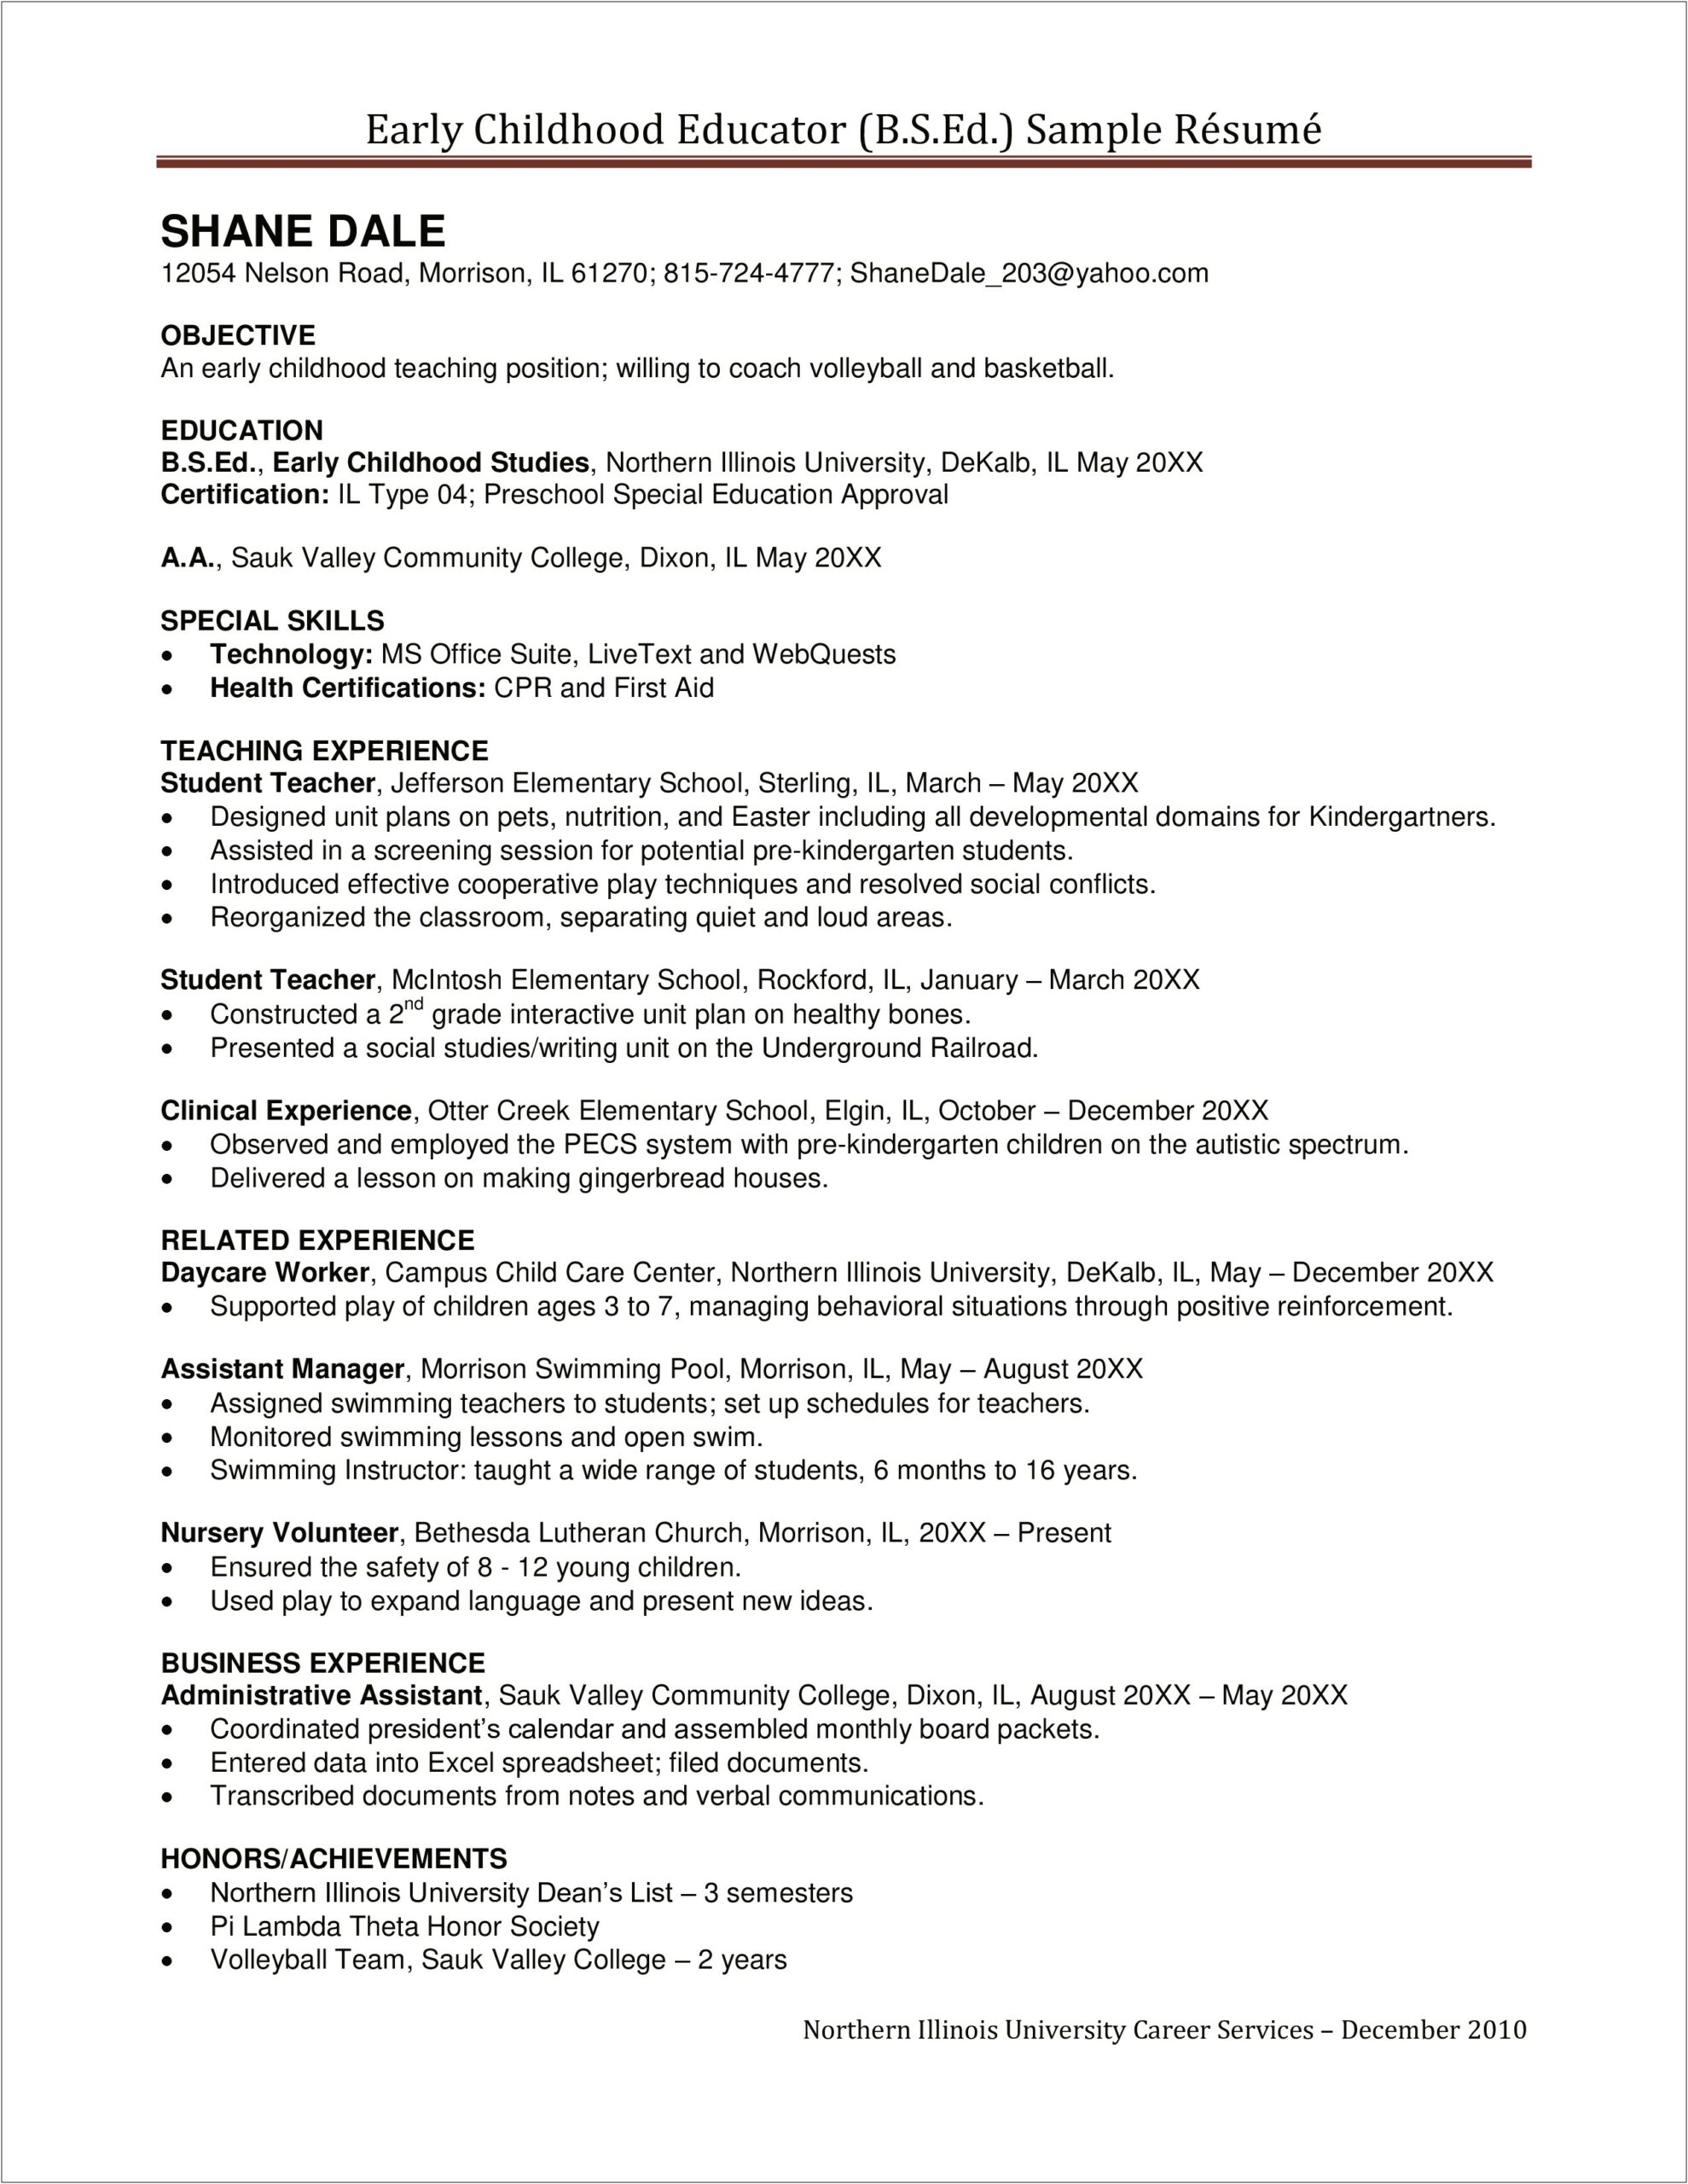 Sample Resume For Childhood Education And Care Service